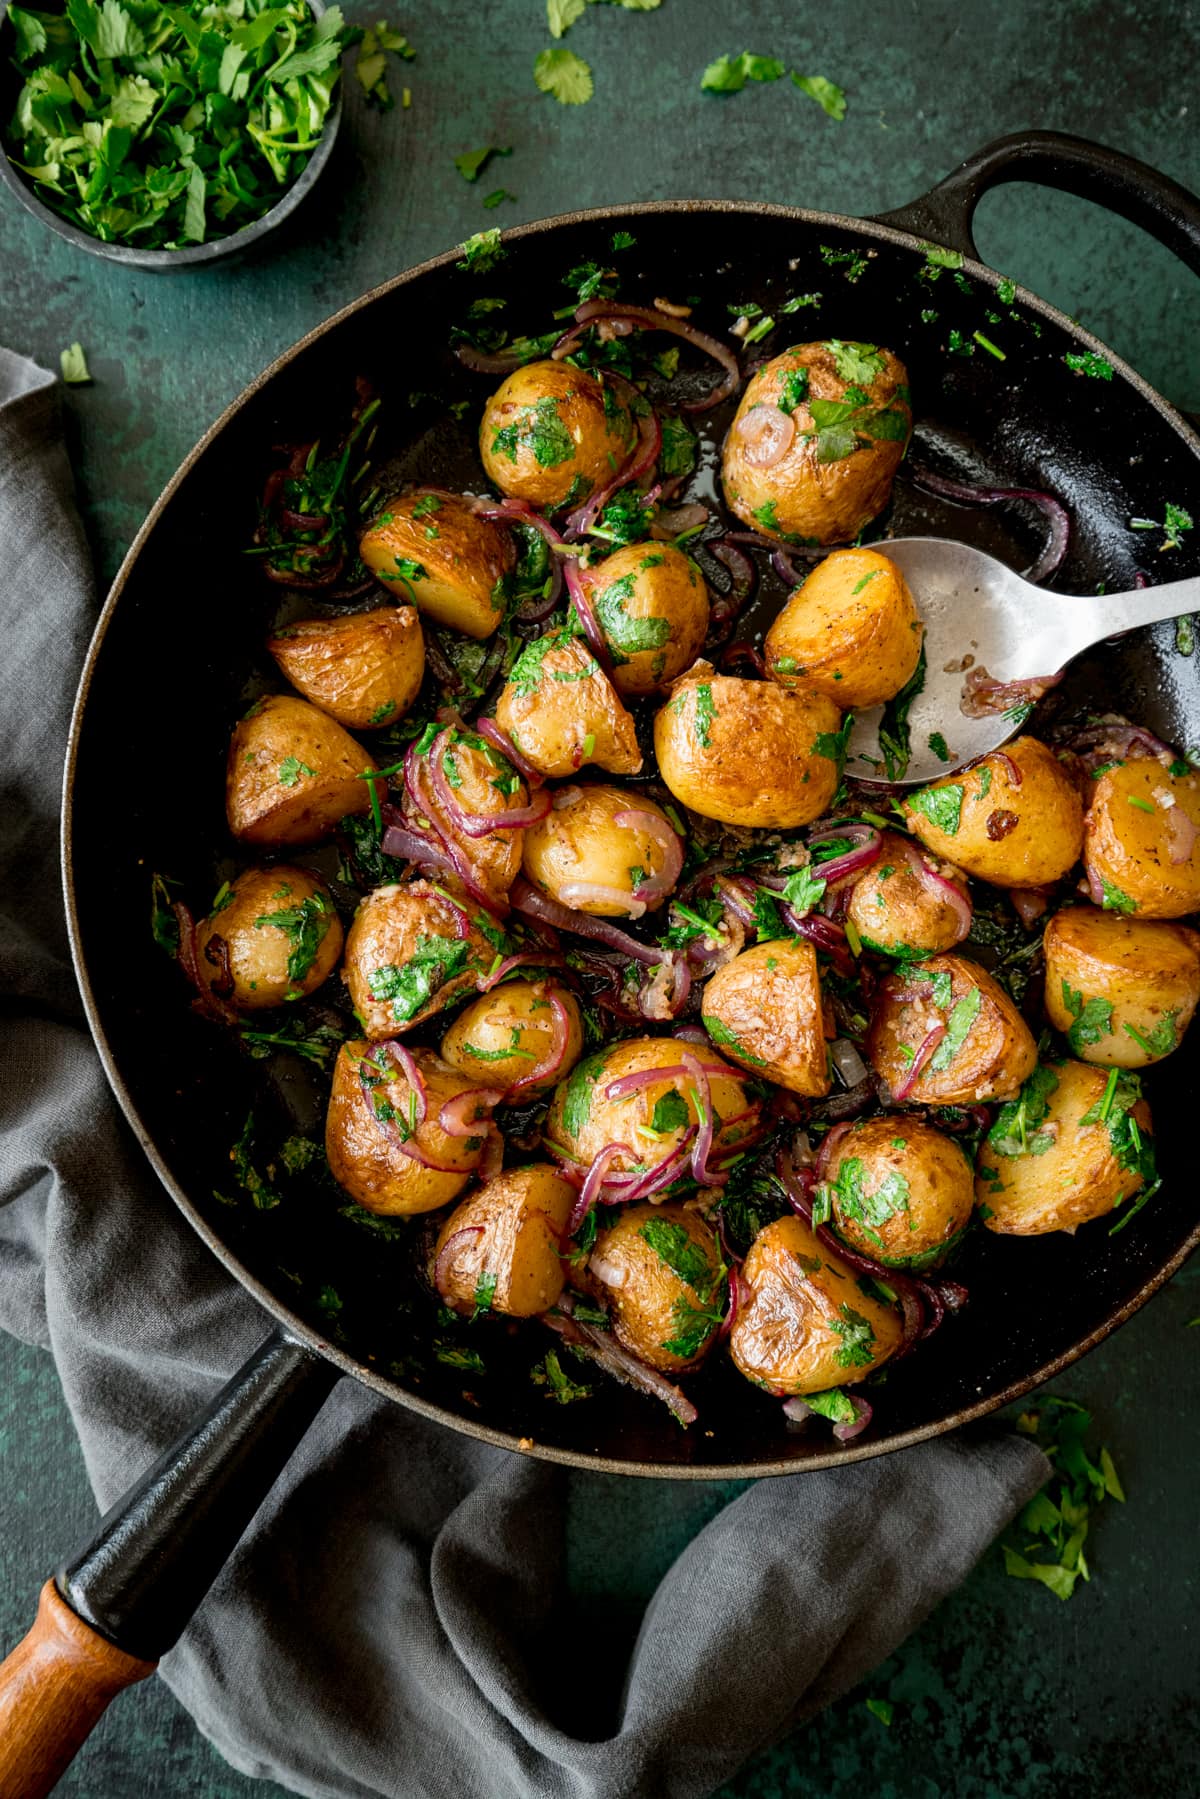 Overhead image of pan-fried potatoes with garlic, coriander and red onion in a black pan with a wooden handle. There is a silver serving spoon sticking out of the pan. The pan is on a dark green surface next to a grey napkin. There is a small bowl of chopped coriander at the top of the image.